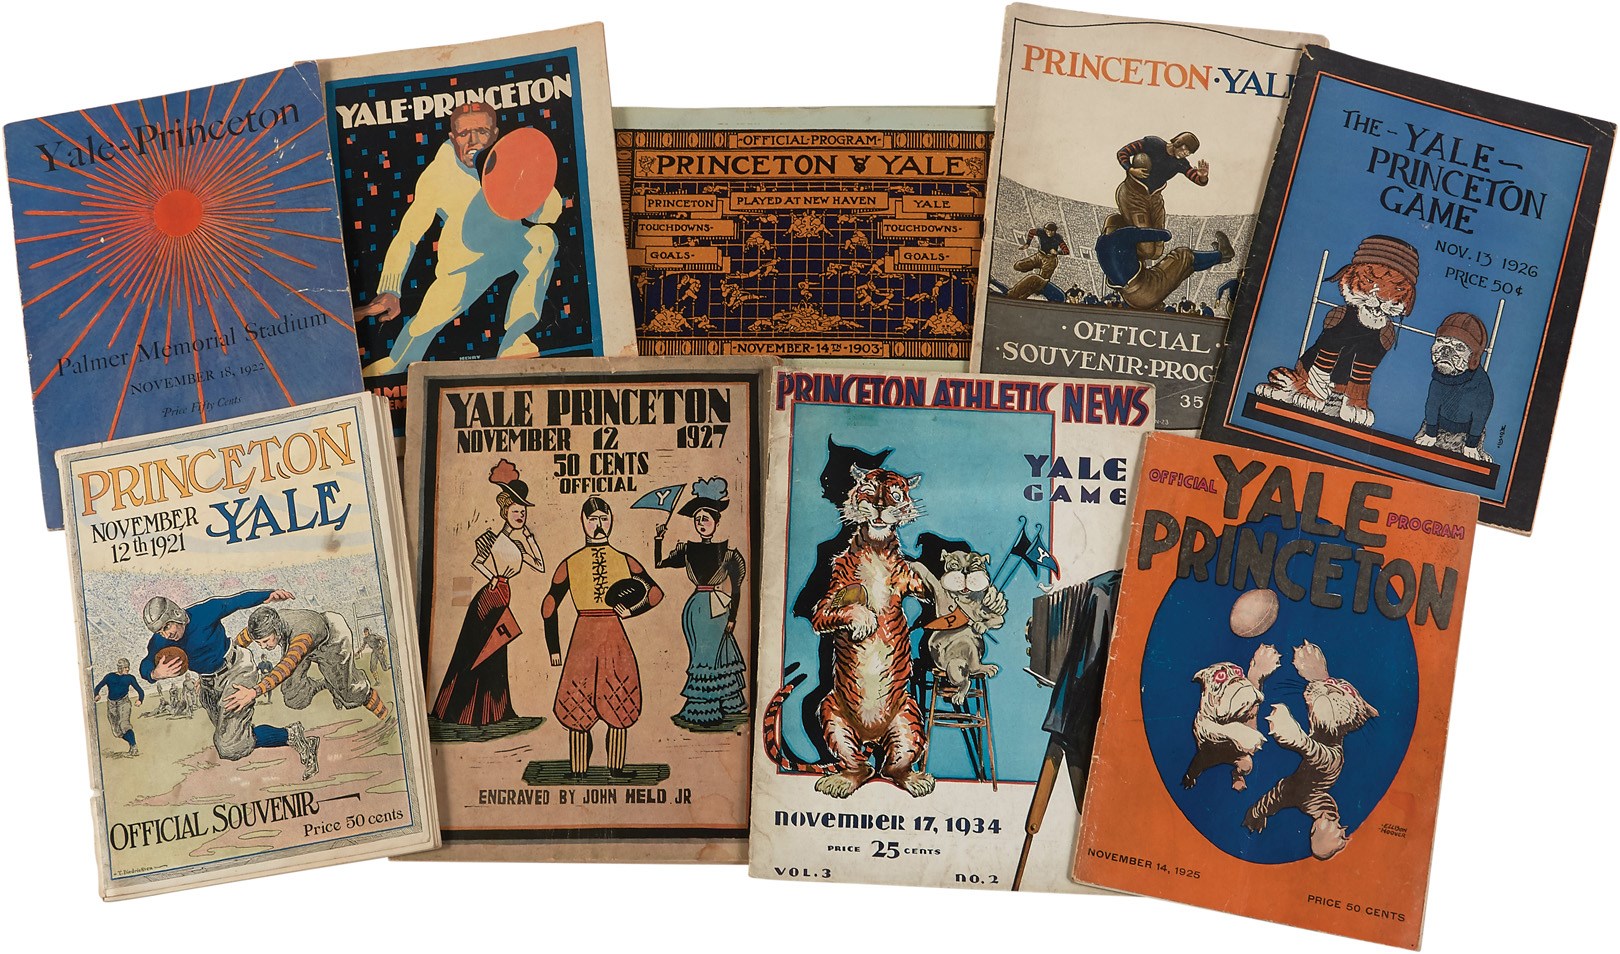 The Ivy League And Collegiate Program Archive - 1903-1960s Yale vs. Princeton Football Rivalry Program Collection (40+)